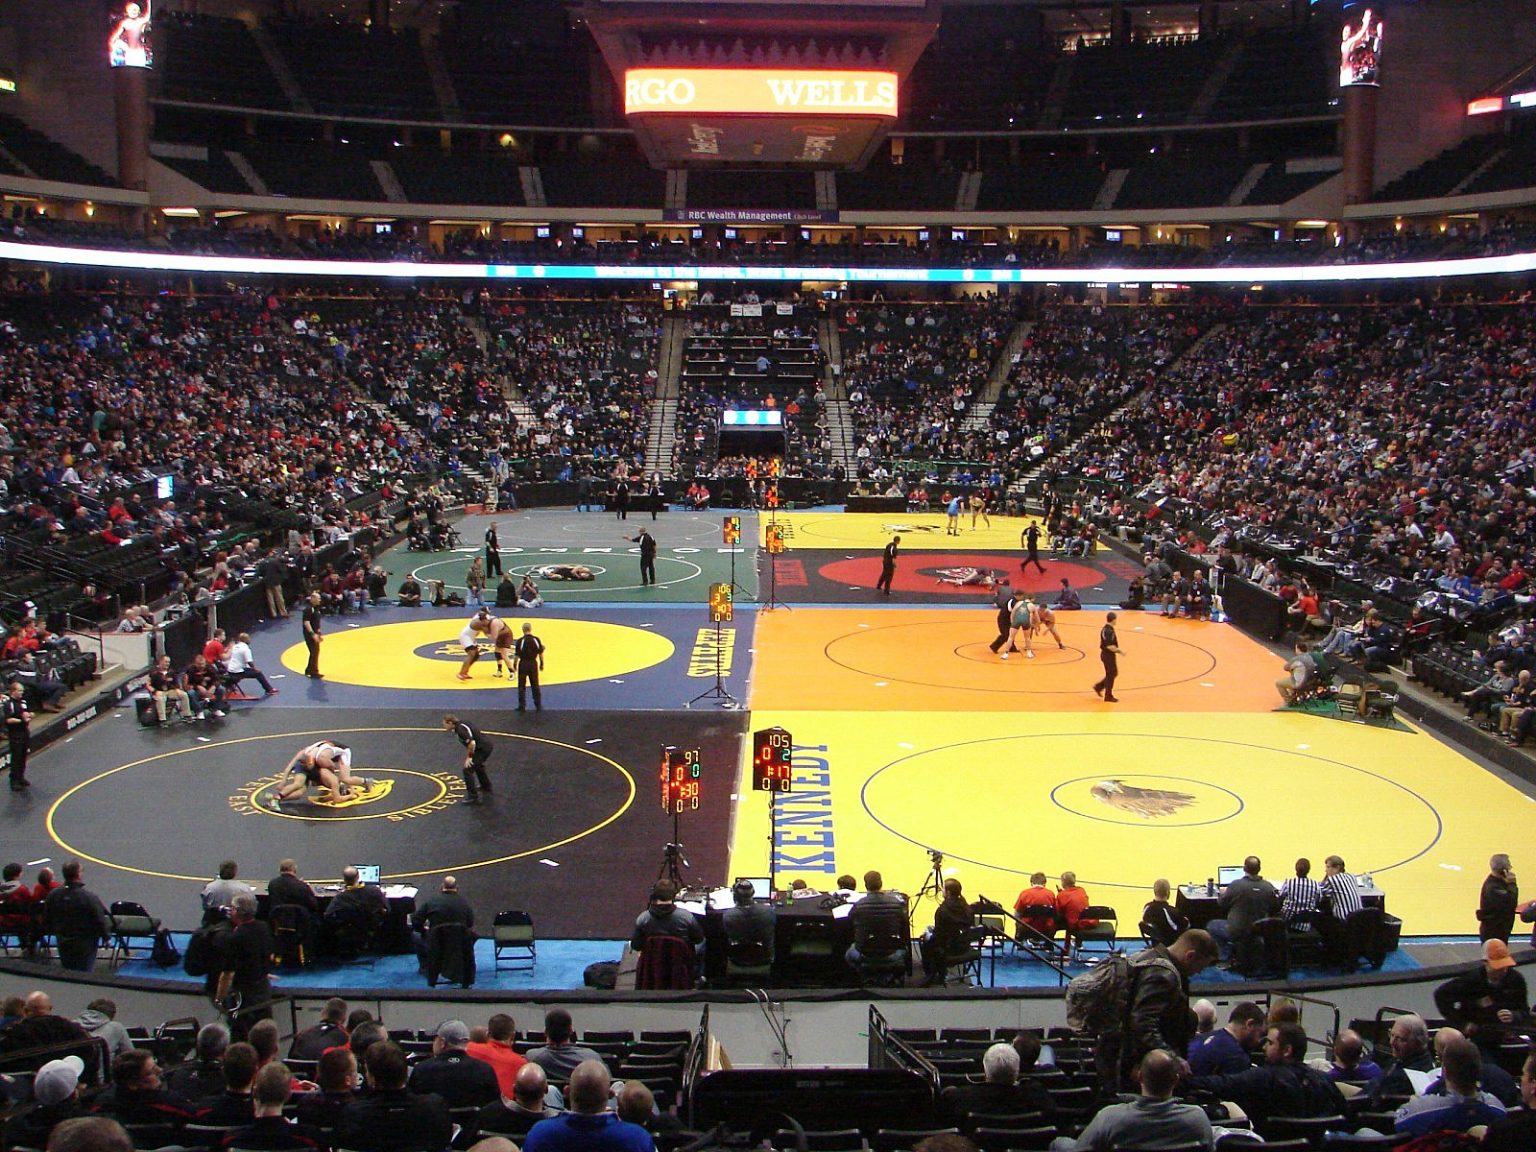 Where Is the MN State Wrestling Tournament?